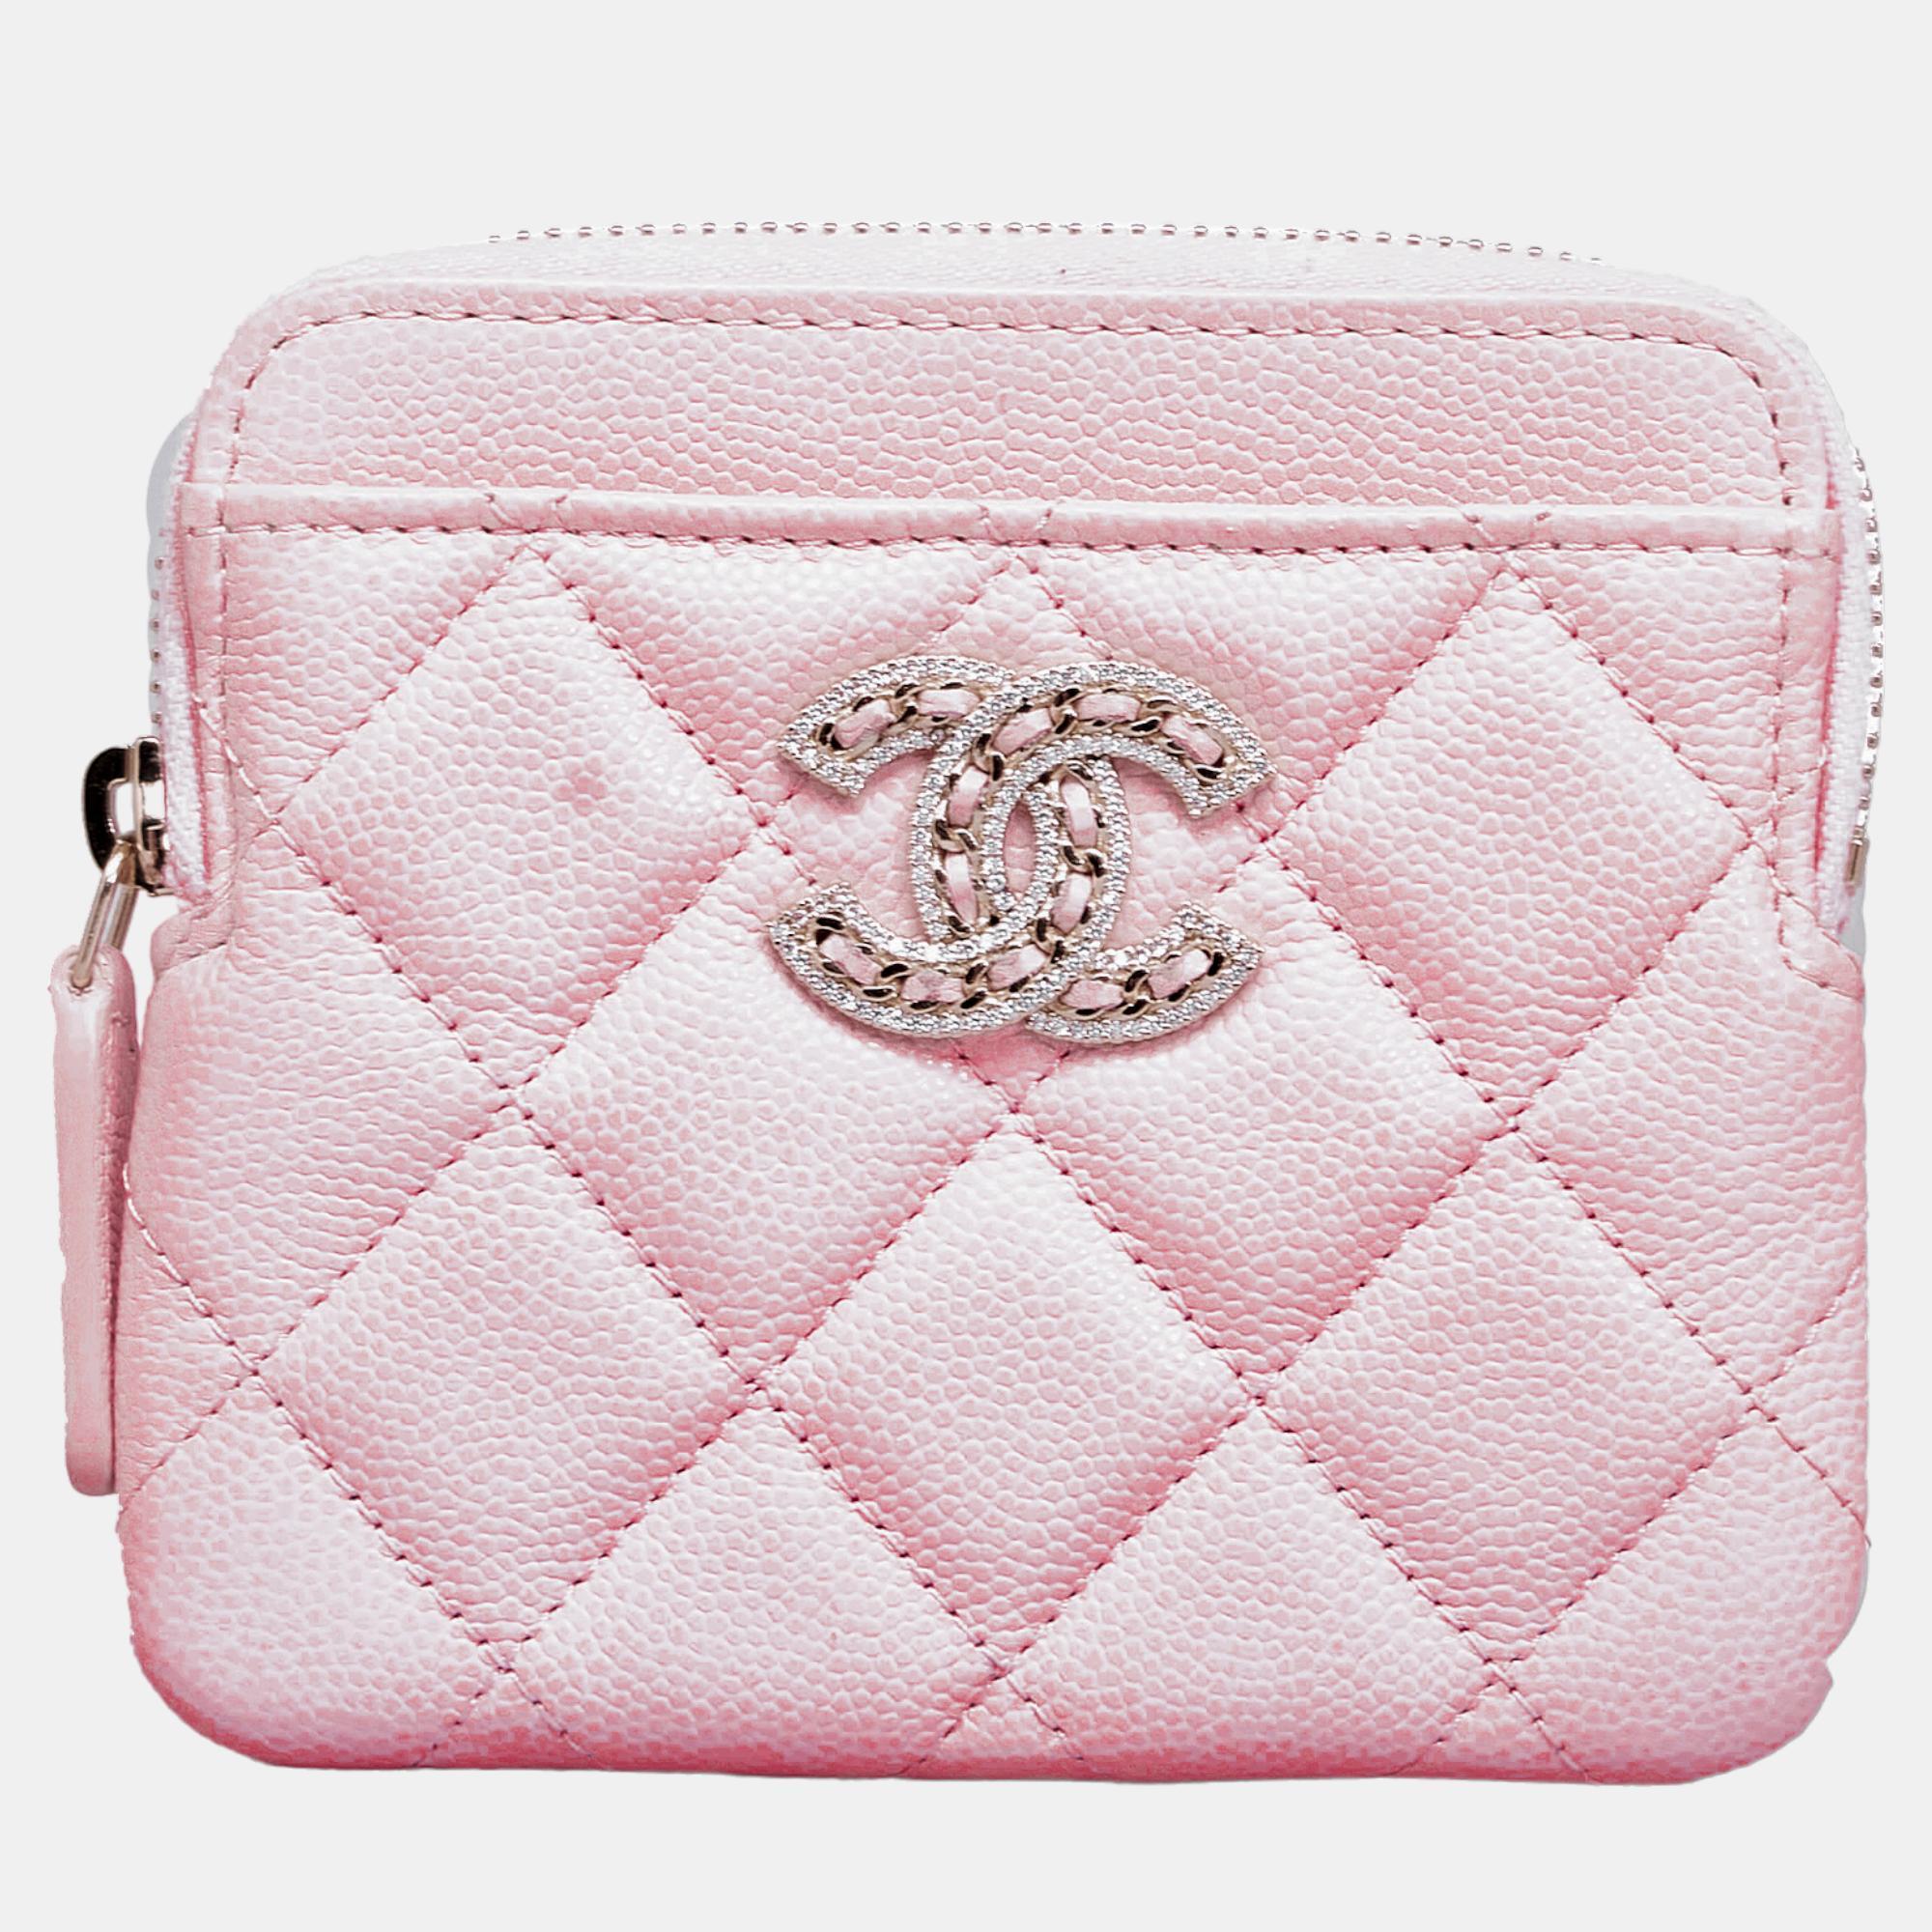 Chanel Pink Caviar CC Crystal Woven Square Zip Around Card Holder